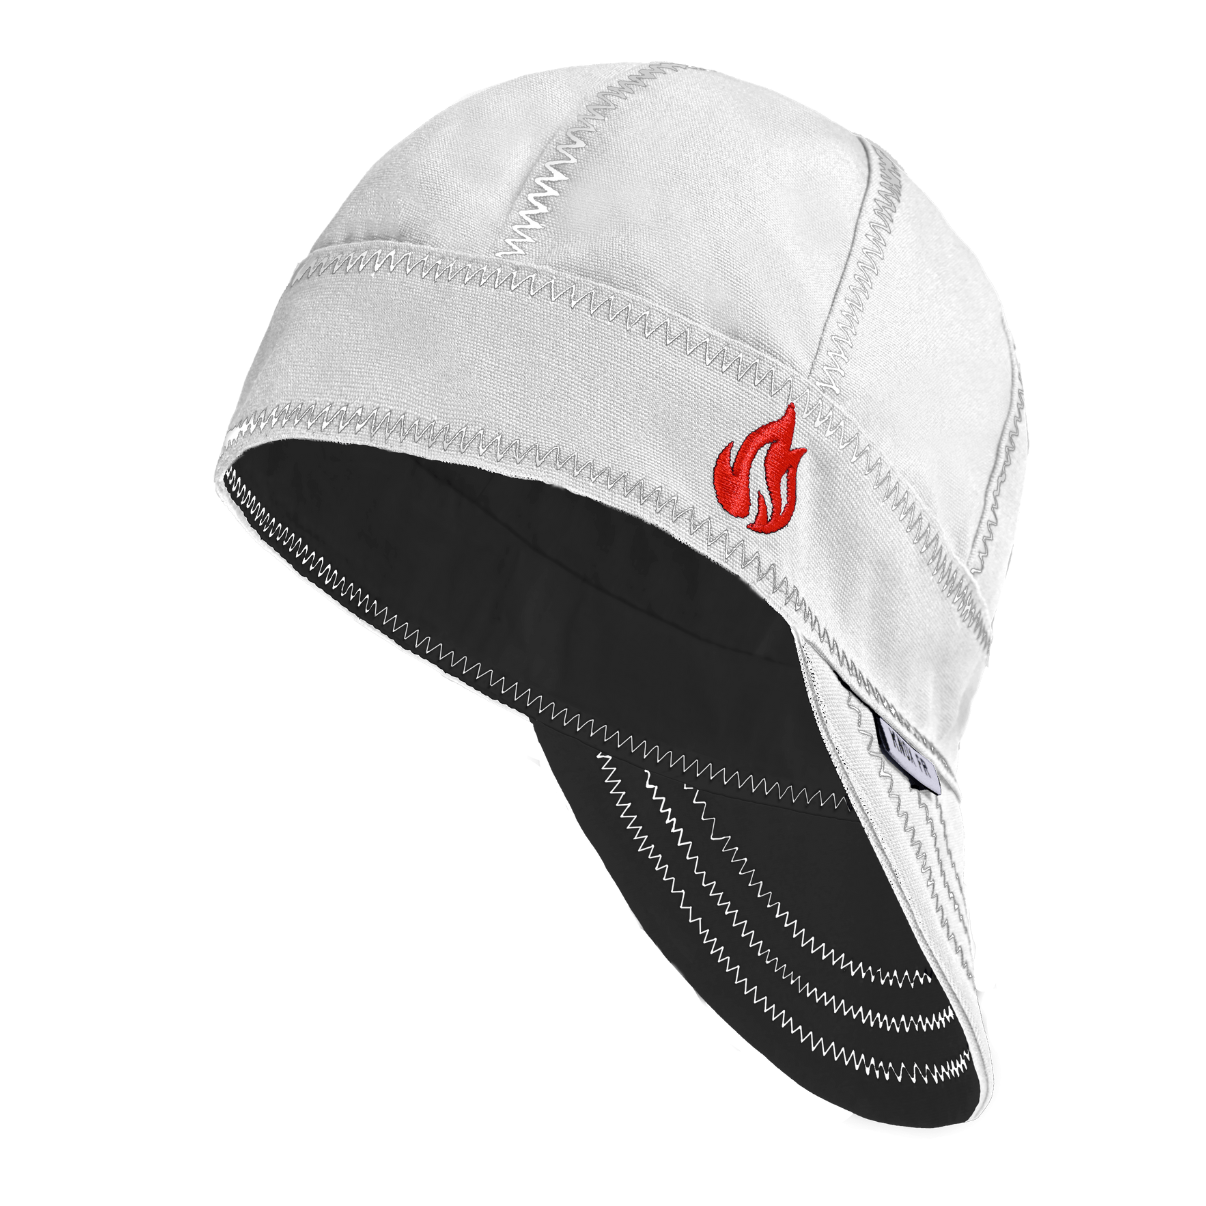 Knox Incorporated Apparel & Accessories Knox FR Welding Cap White